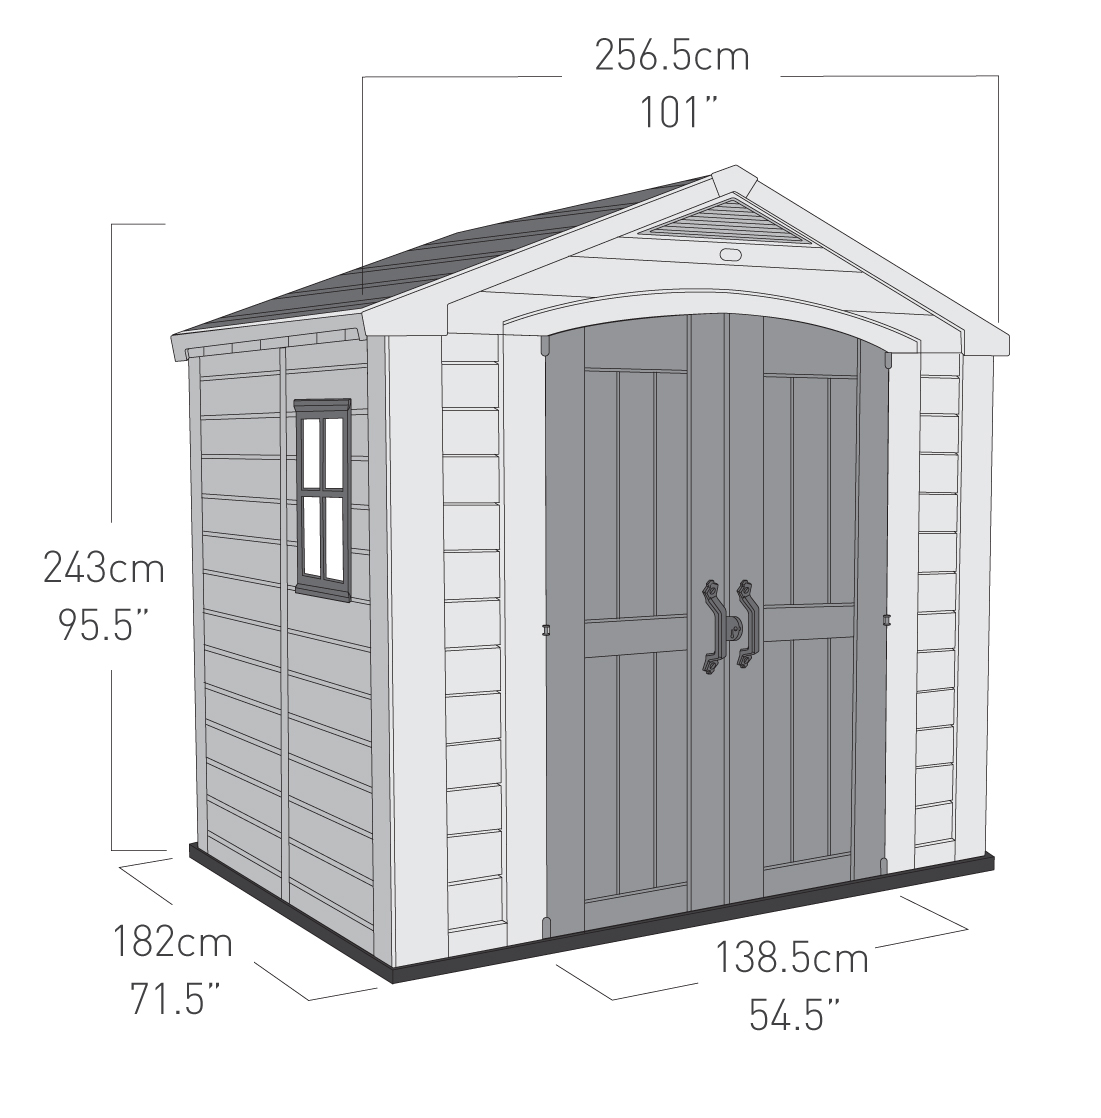 KETER FACTOR SHED 8X6FT